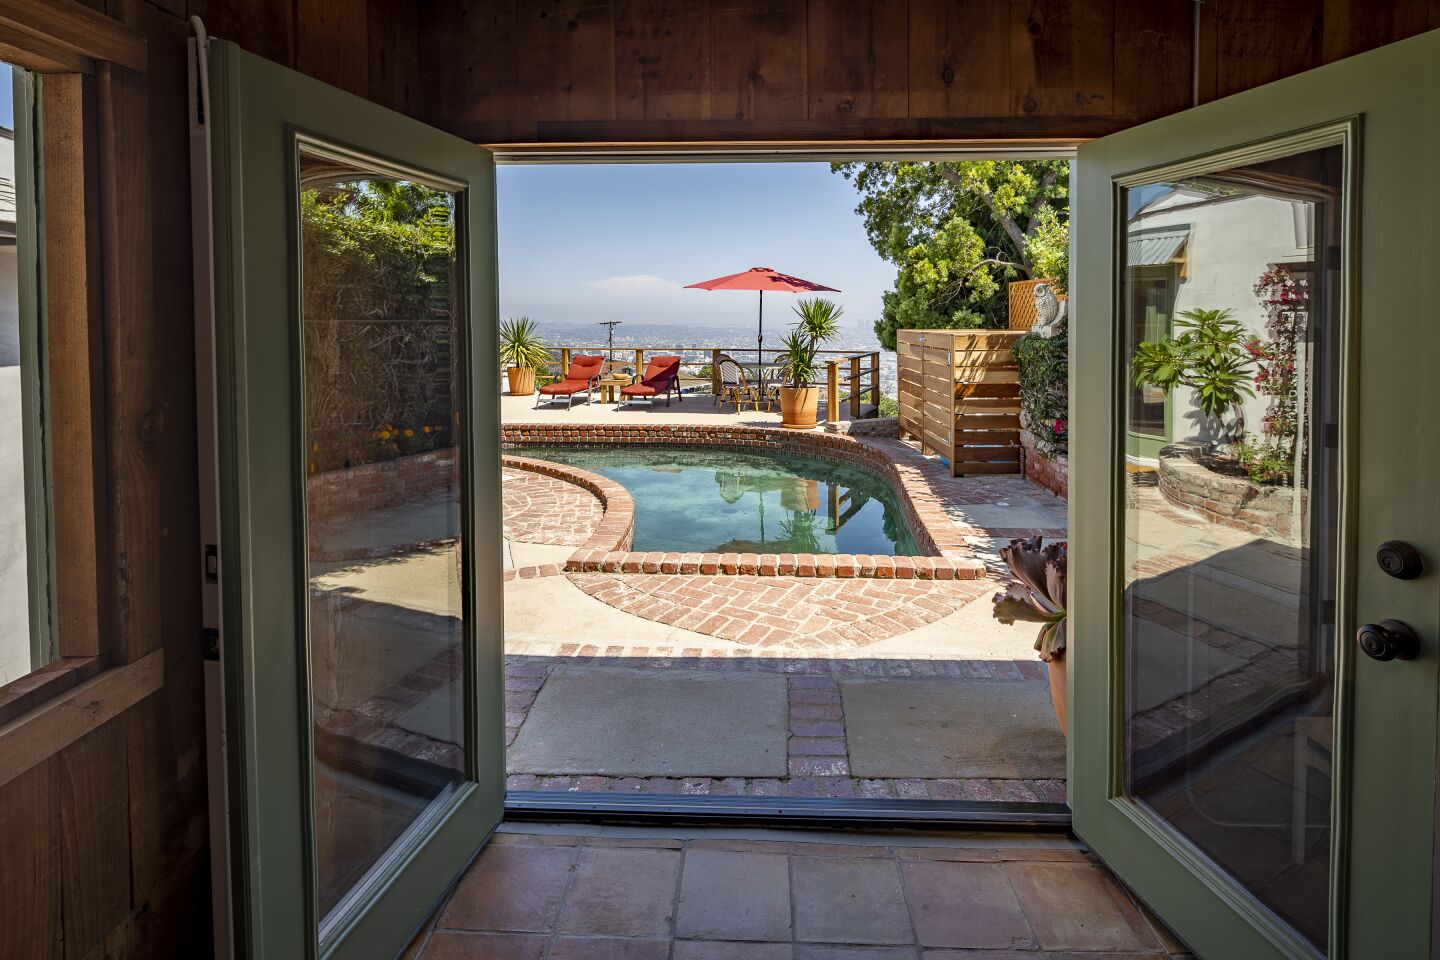 French doors in the pool house open directly to the pool deck.